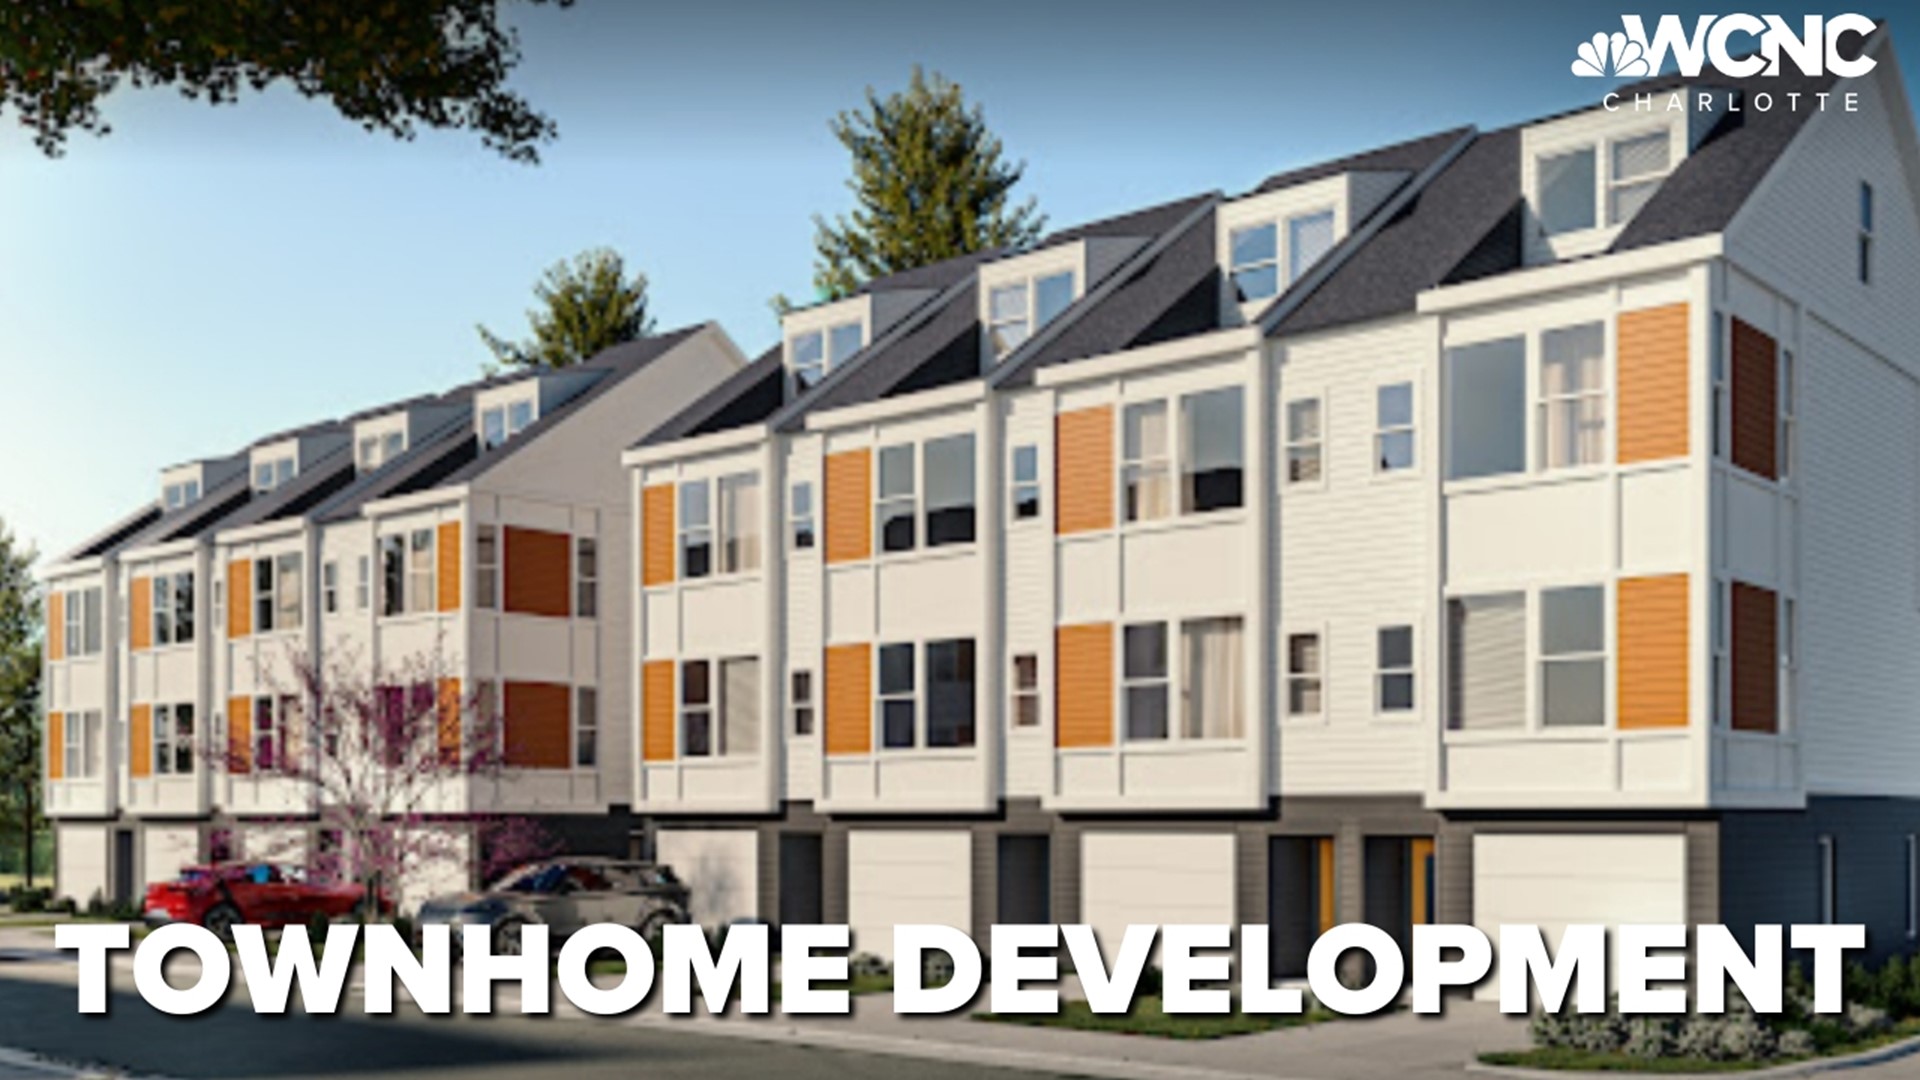 Two townhome projects are on the Charlotte City Council's agenda for Monday's zoning meeting.